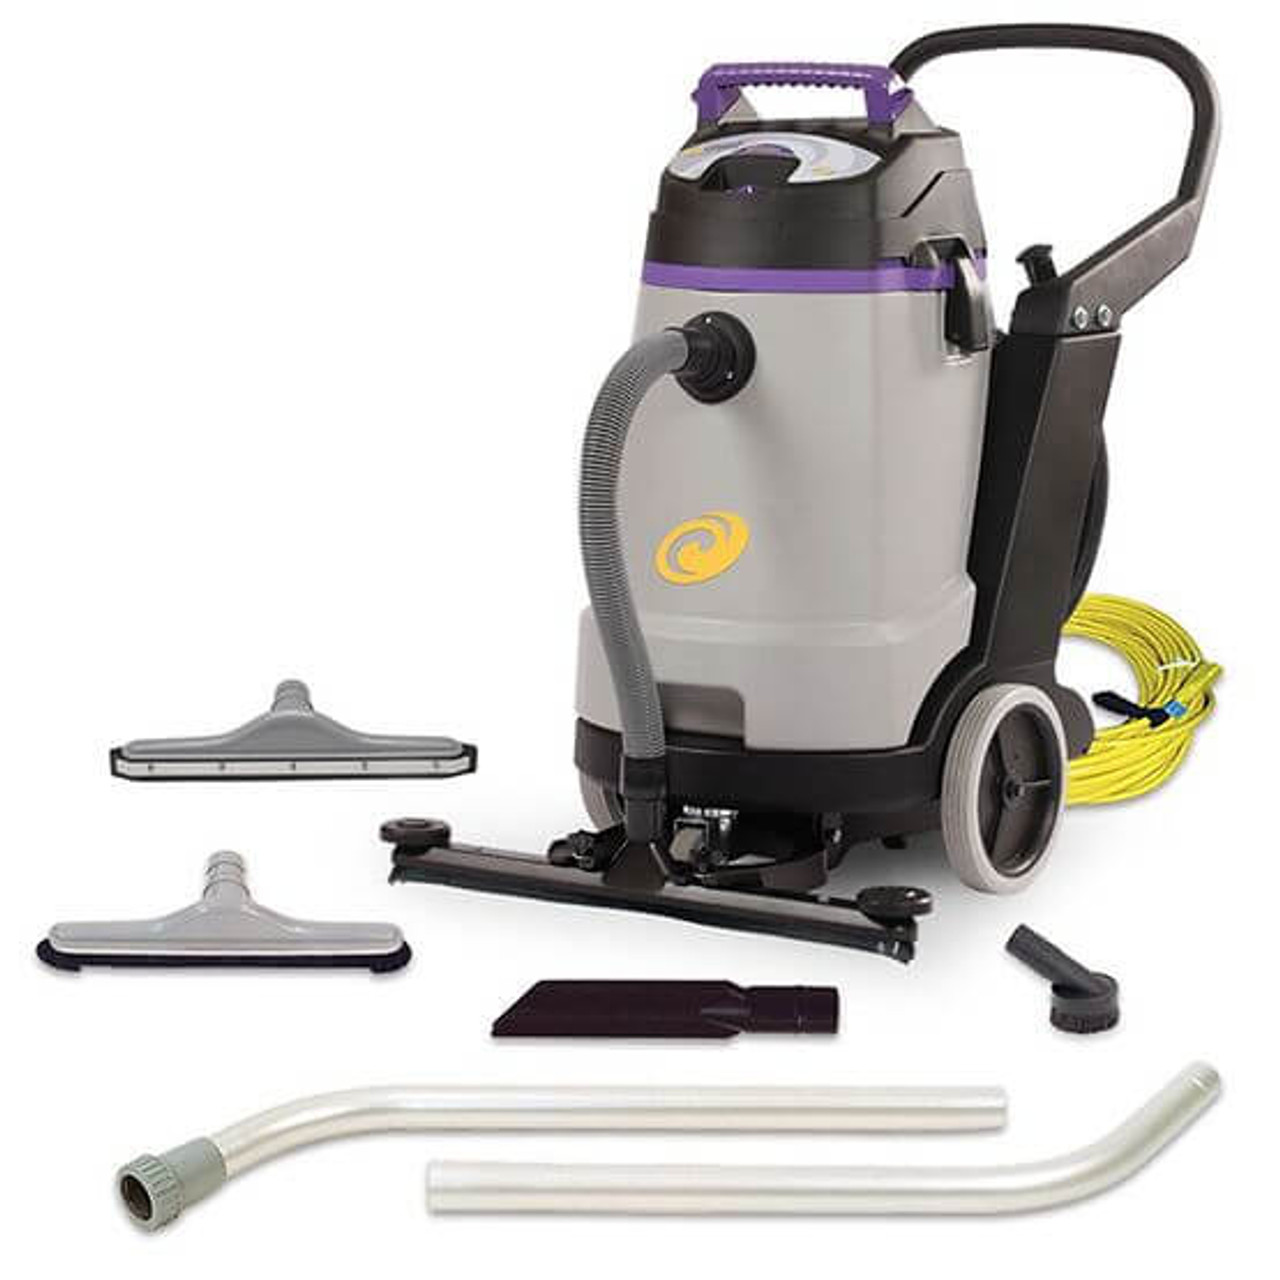 ProTeam 20 Gallon ProGuard 20 Wet / Dry Vacuum with Tool Kit and Front Mount Squeegee - 120V | Heavy-Duty Cleaning and Versatile Wet/Dry Functionality